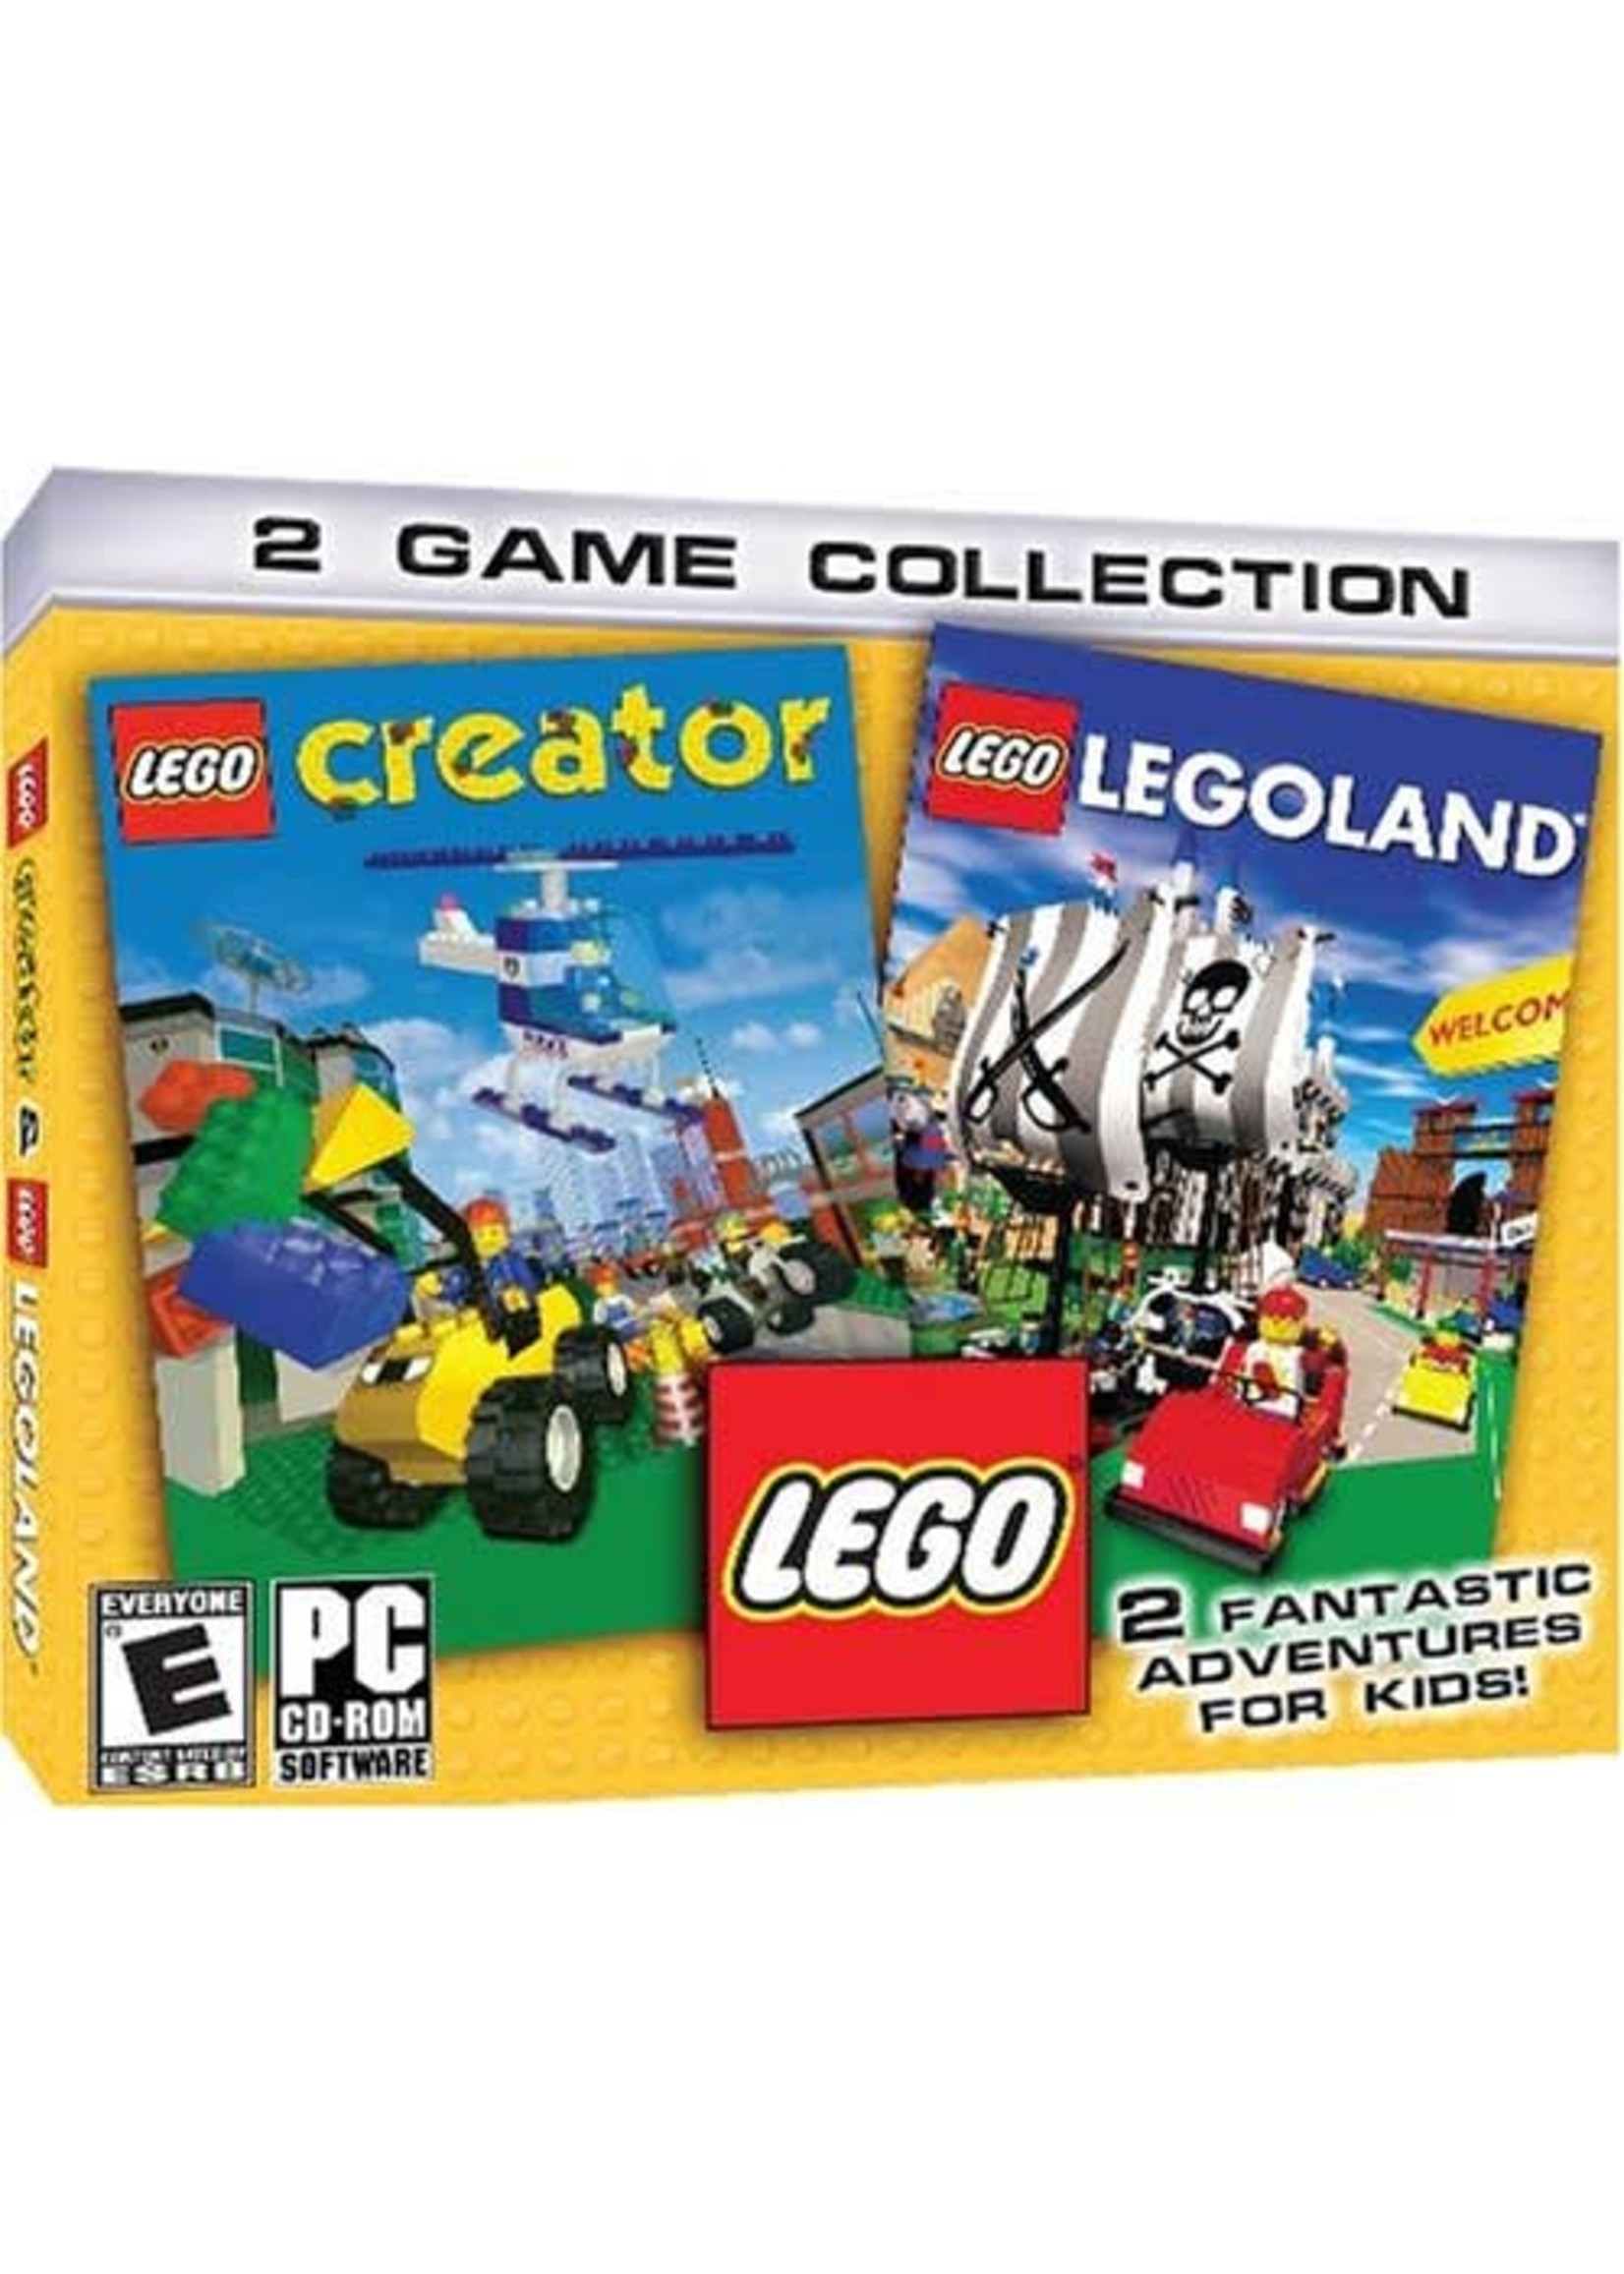 Lego Creator And Lego Land PC Games